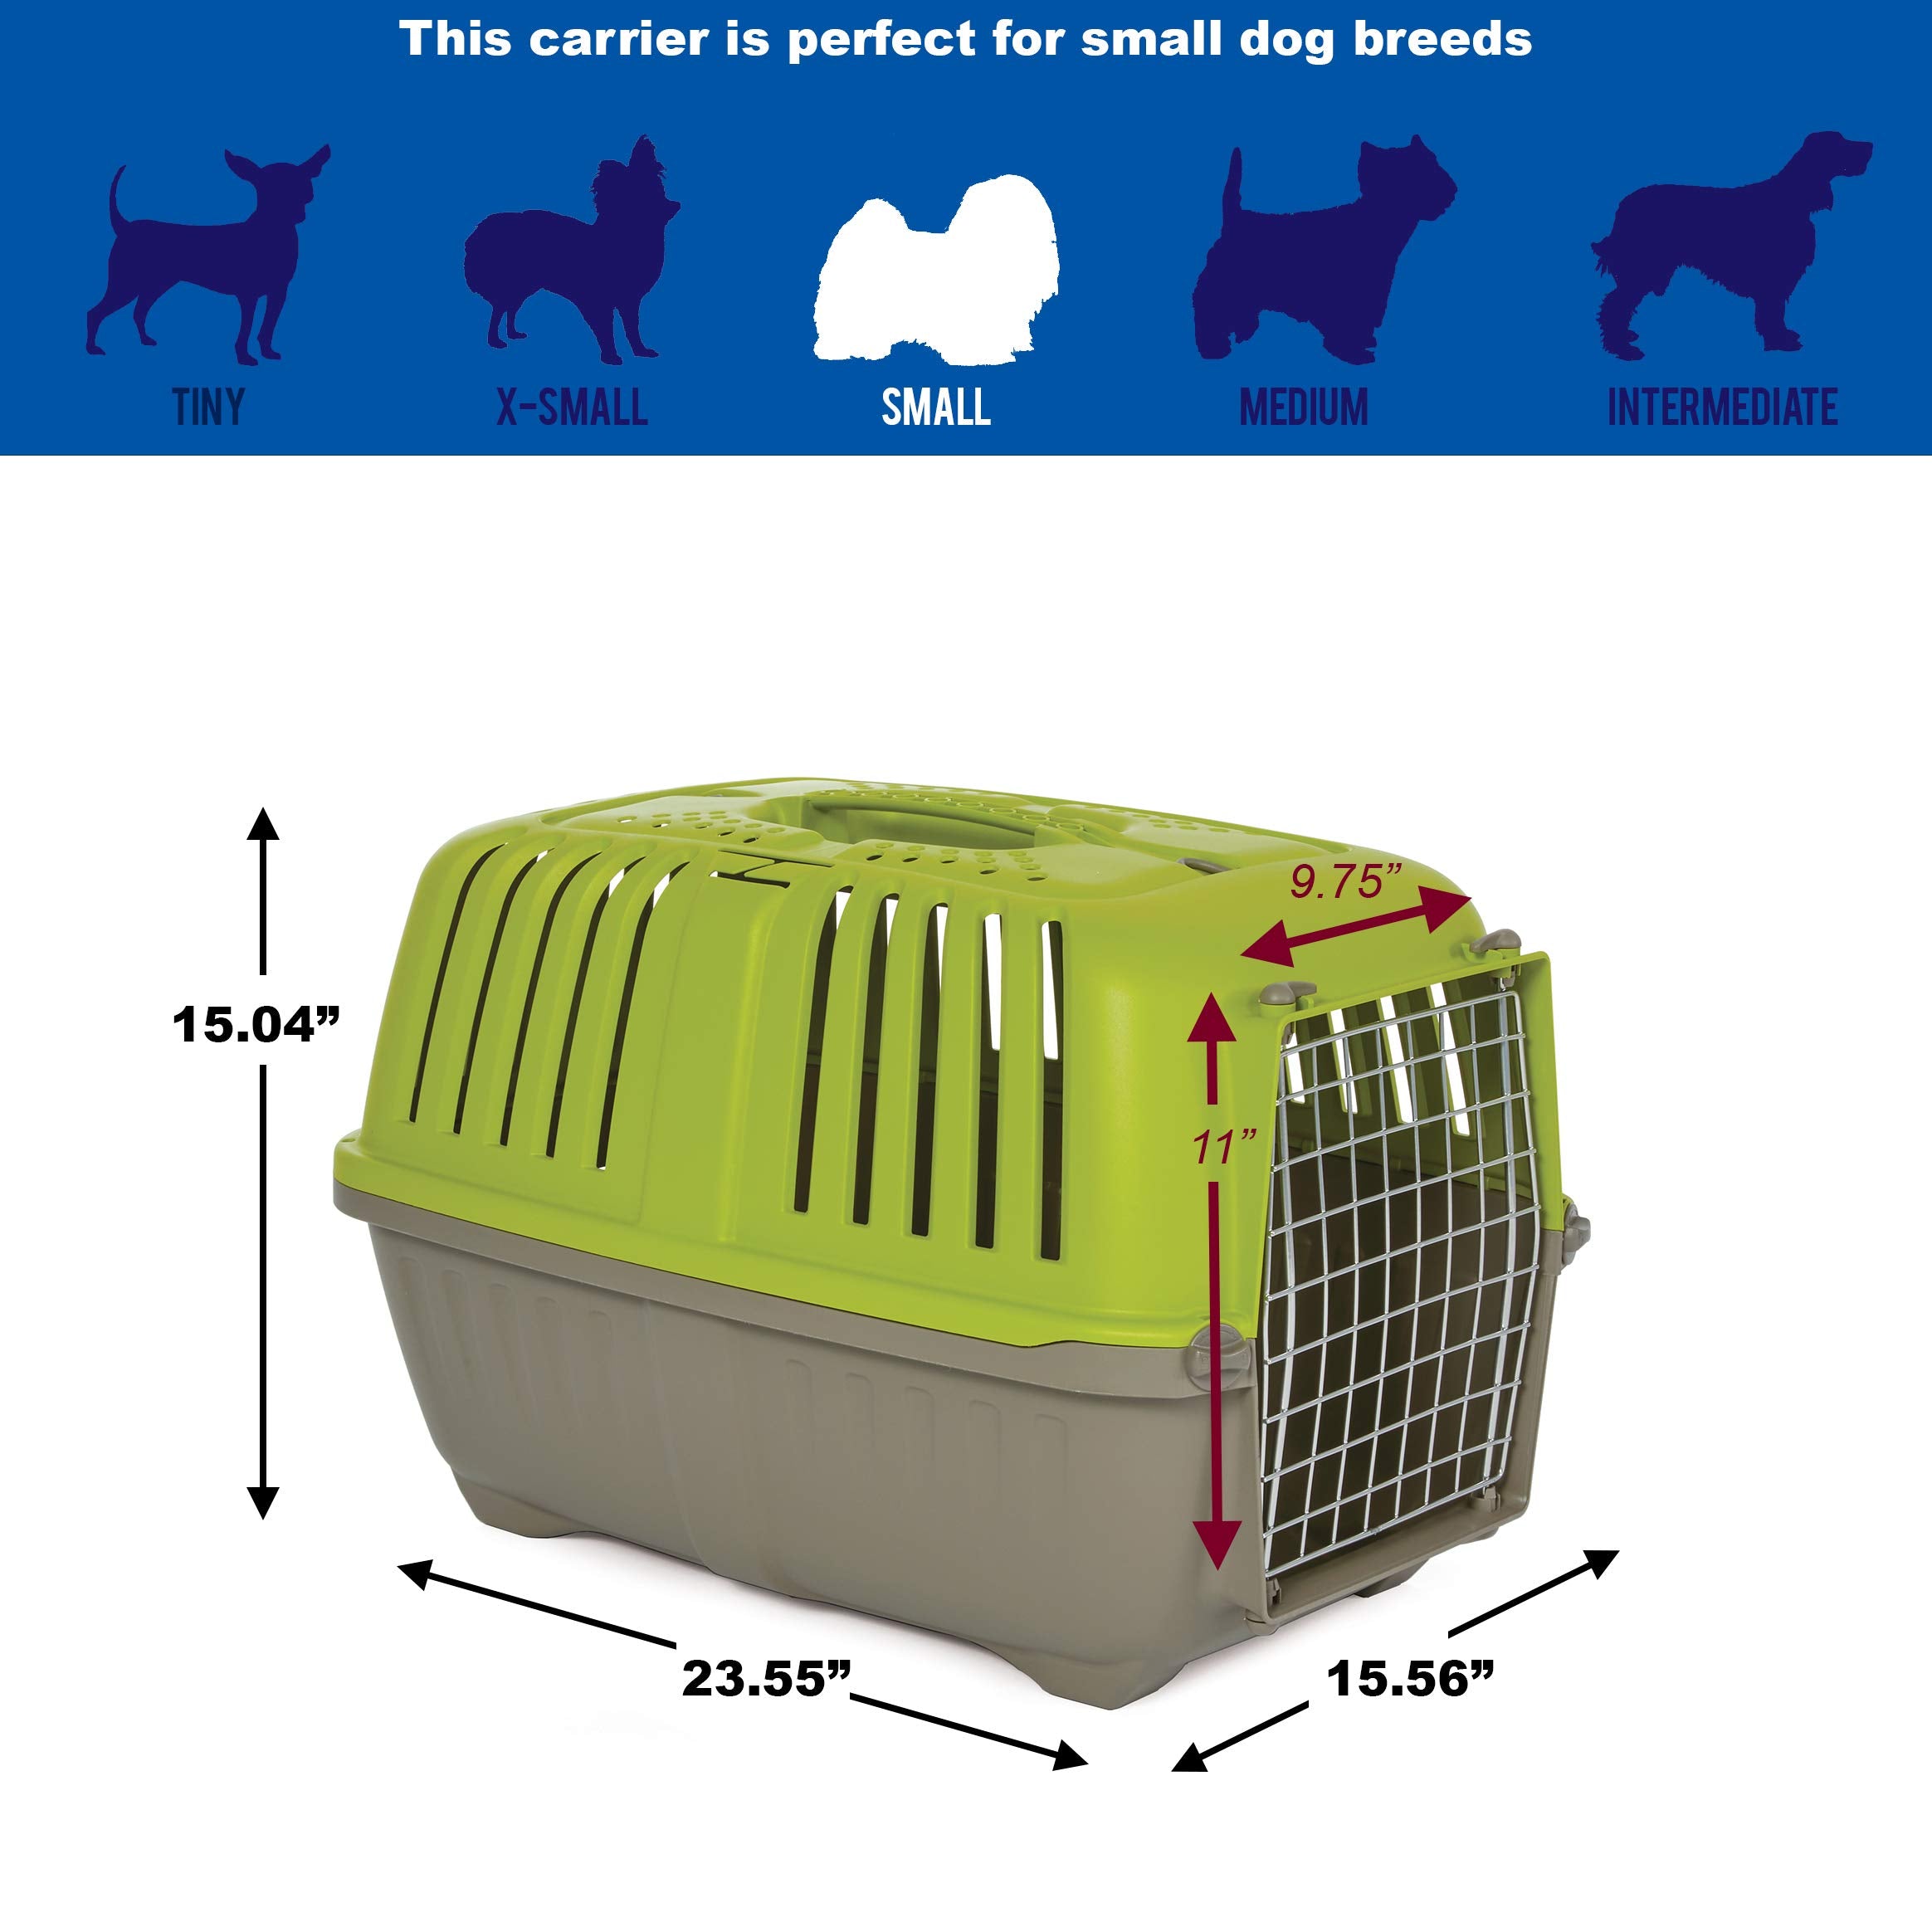 Midwest Spree Hard-Sided Travel Cat and Dog Kennel Carrier - Green - 24" X 15.5" X 15" Inches  